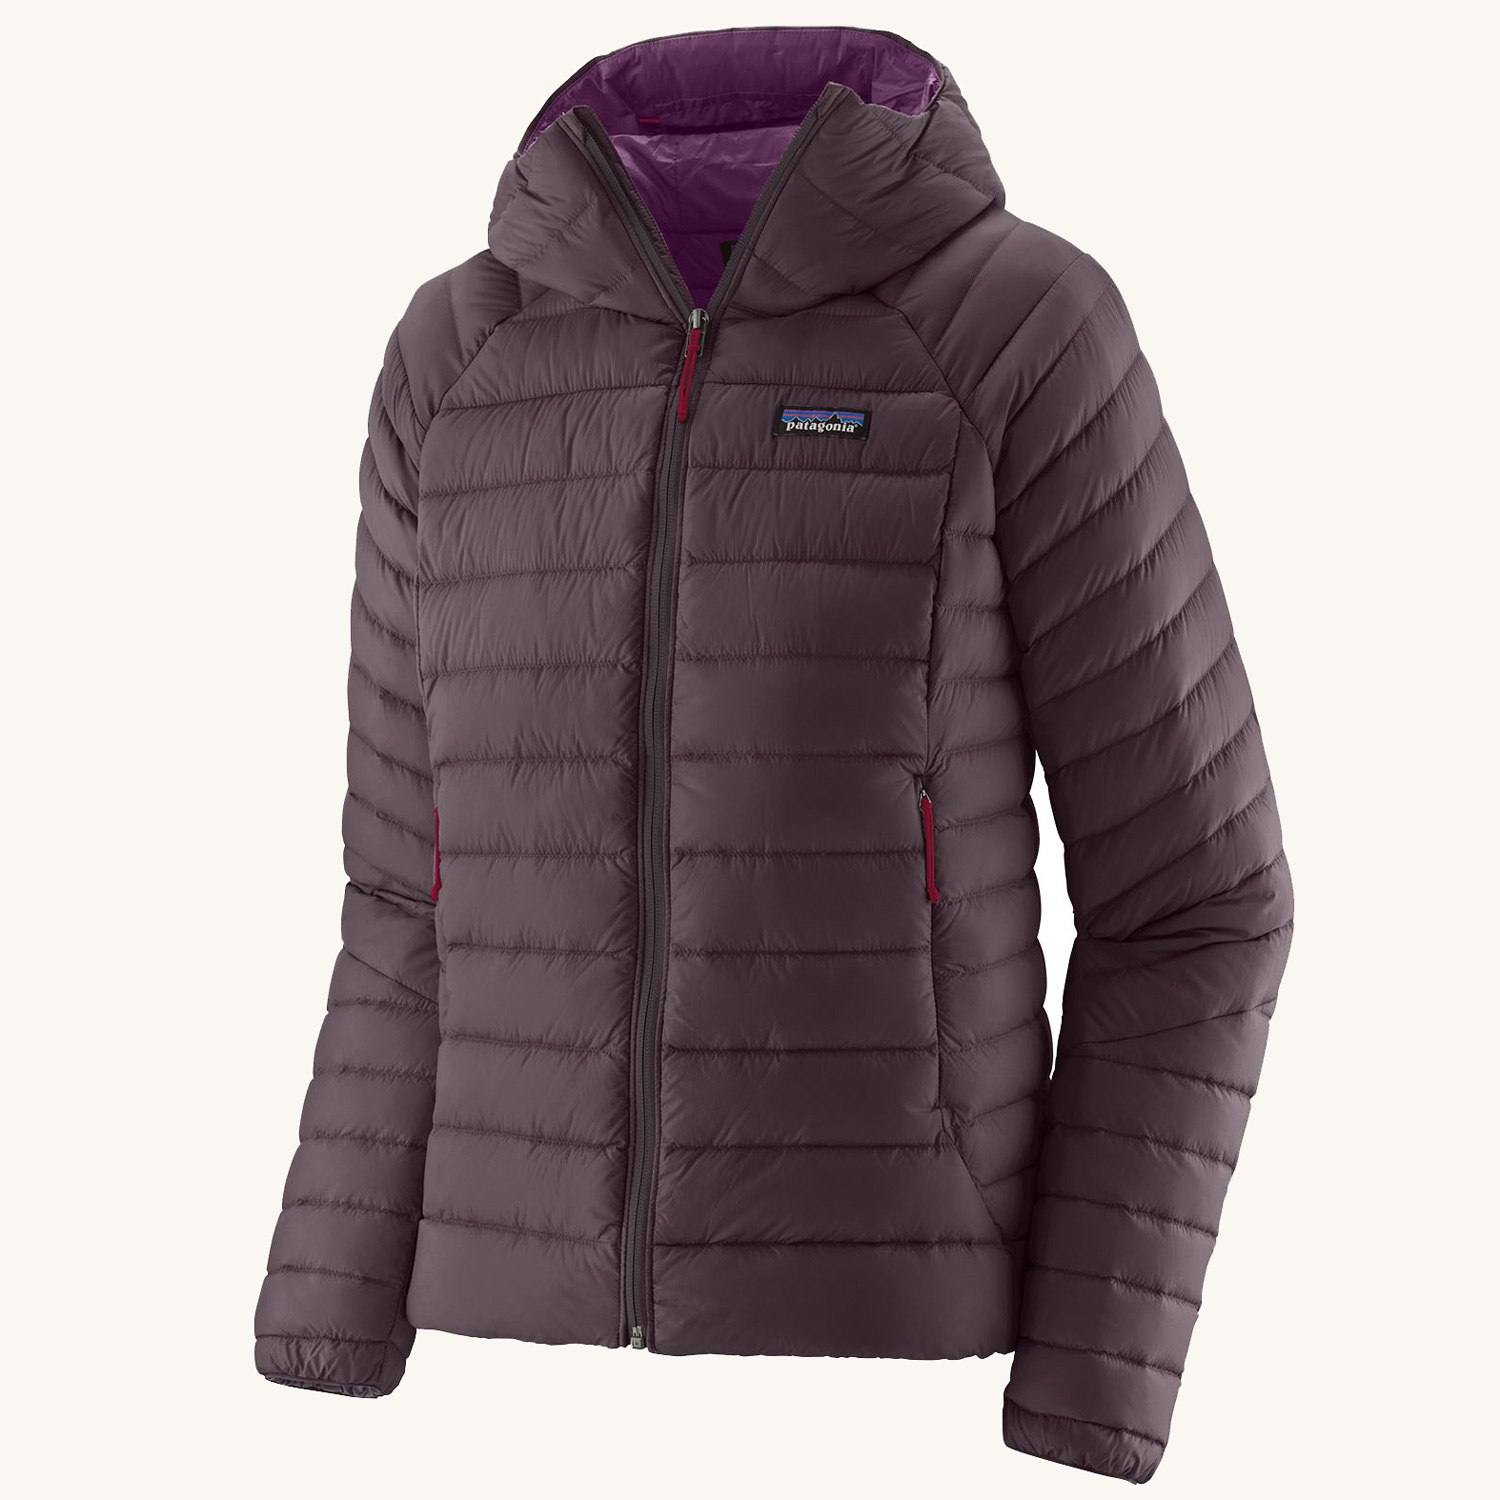 Patagonia Women's Down Insulated Sweater Hoody Jacket - Obsidian Plum